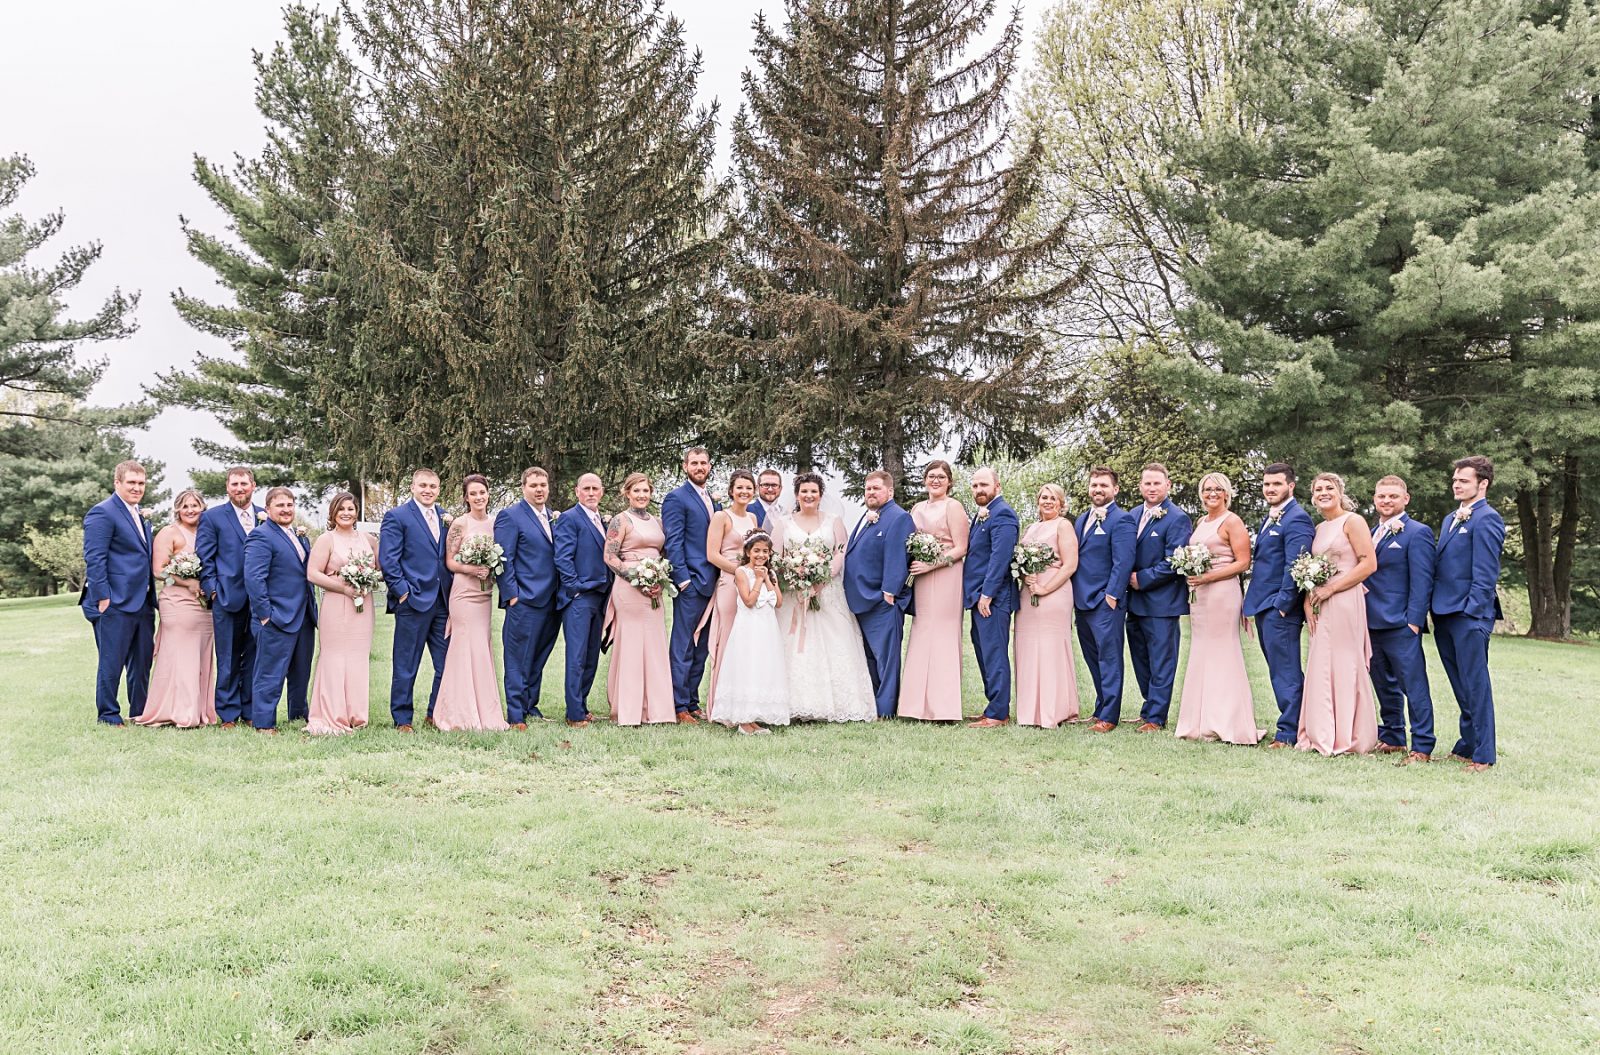 Wedding photography by Diana Gramlich, Blush and navy blue bridal party with bride and groom in front of the pine trees